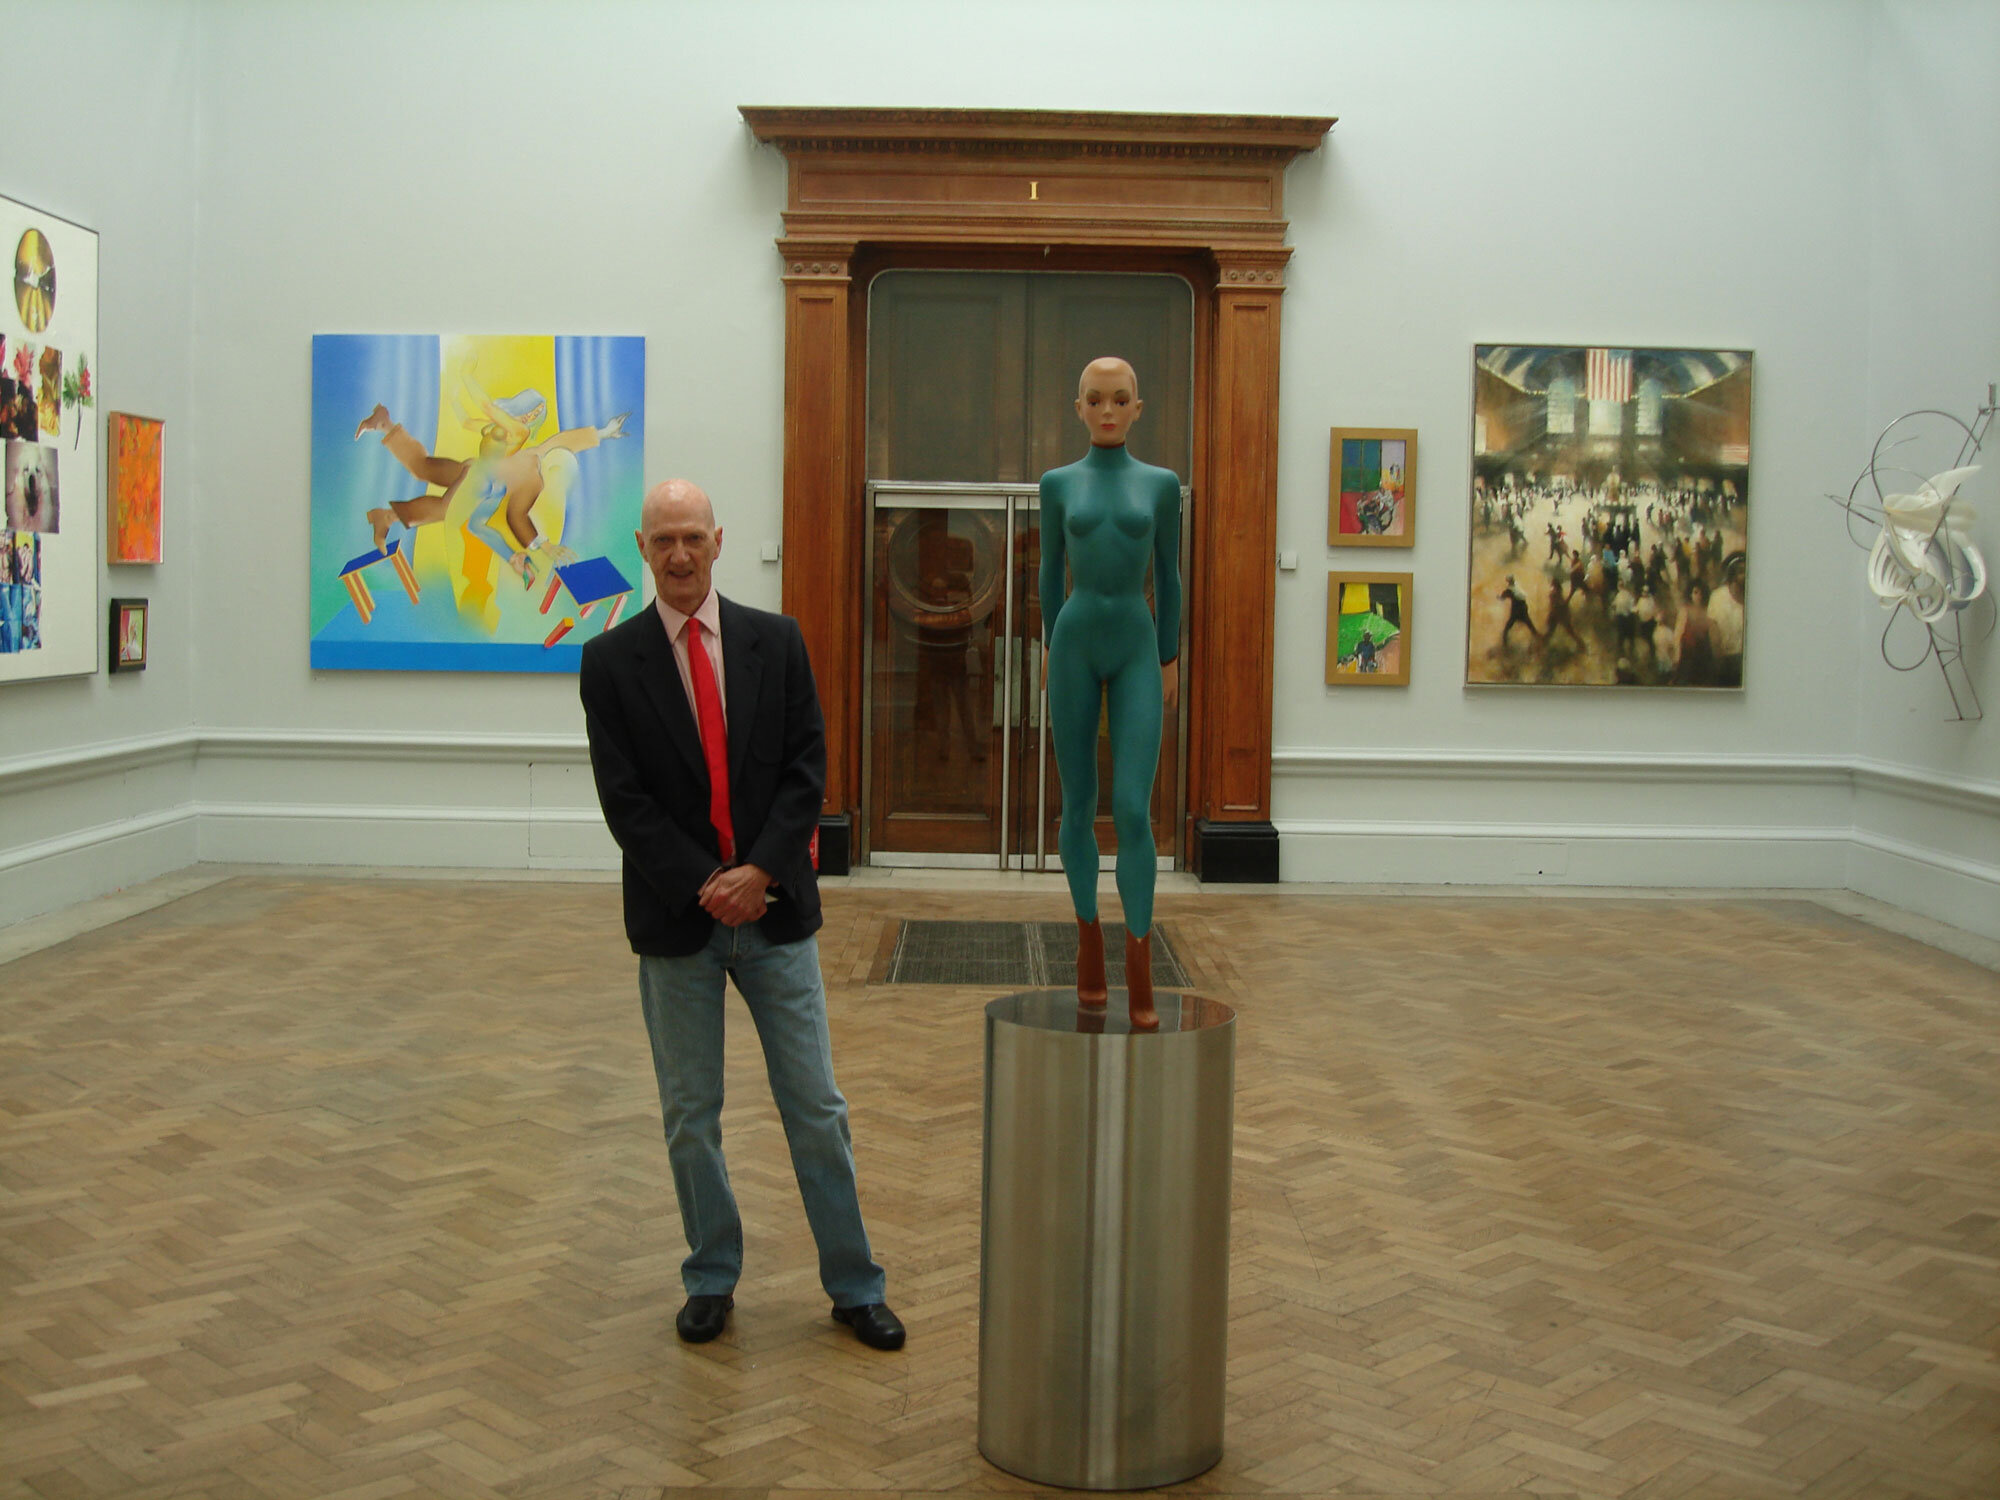  Allen Jones curating a room at the RA with Bill’s Grand Central painting, 2010 